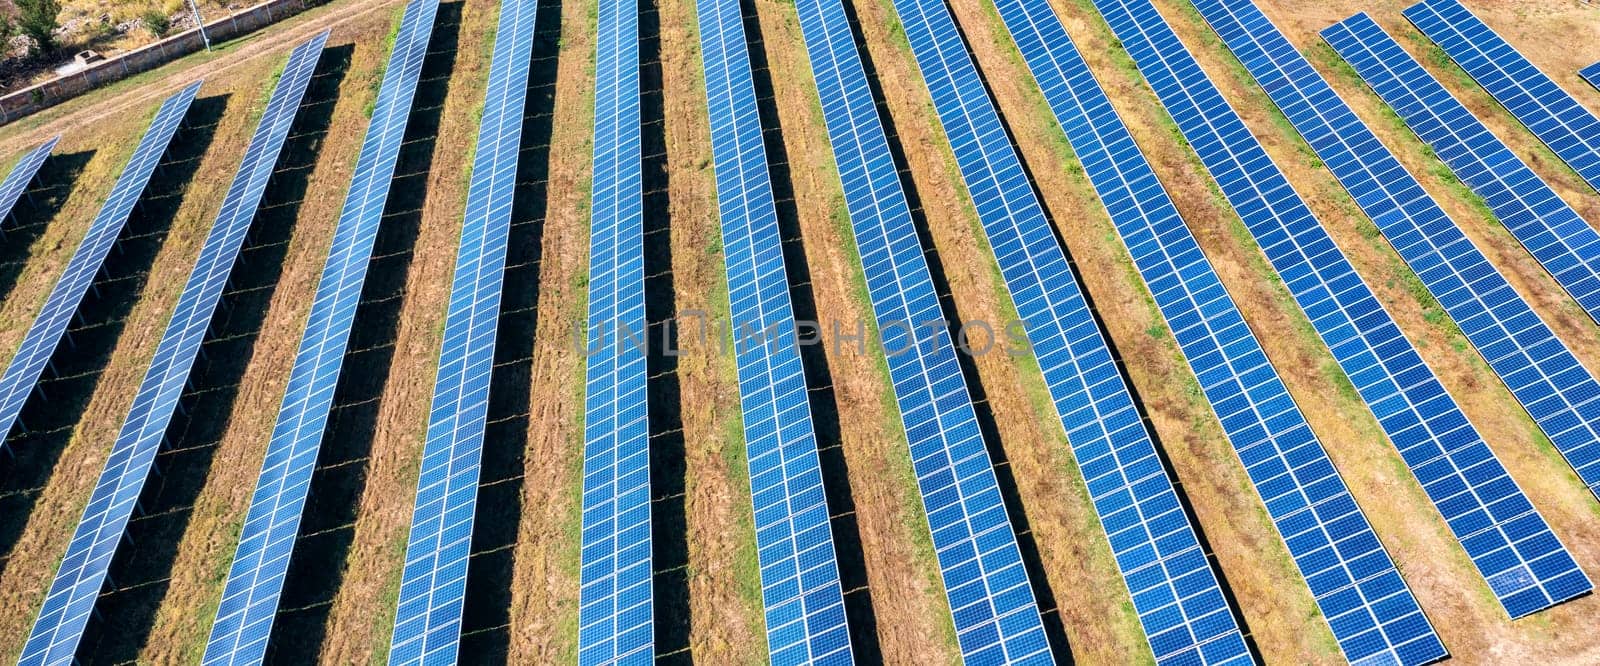 Panoramic view of solar energy photovoltaic power generation